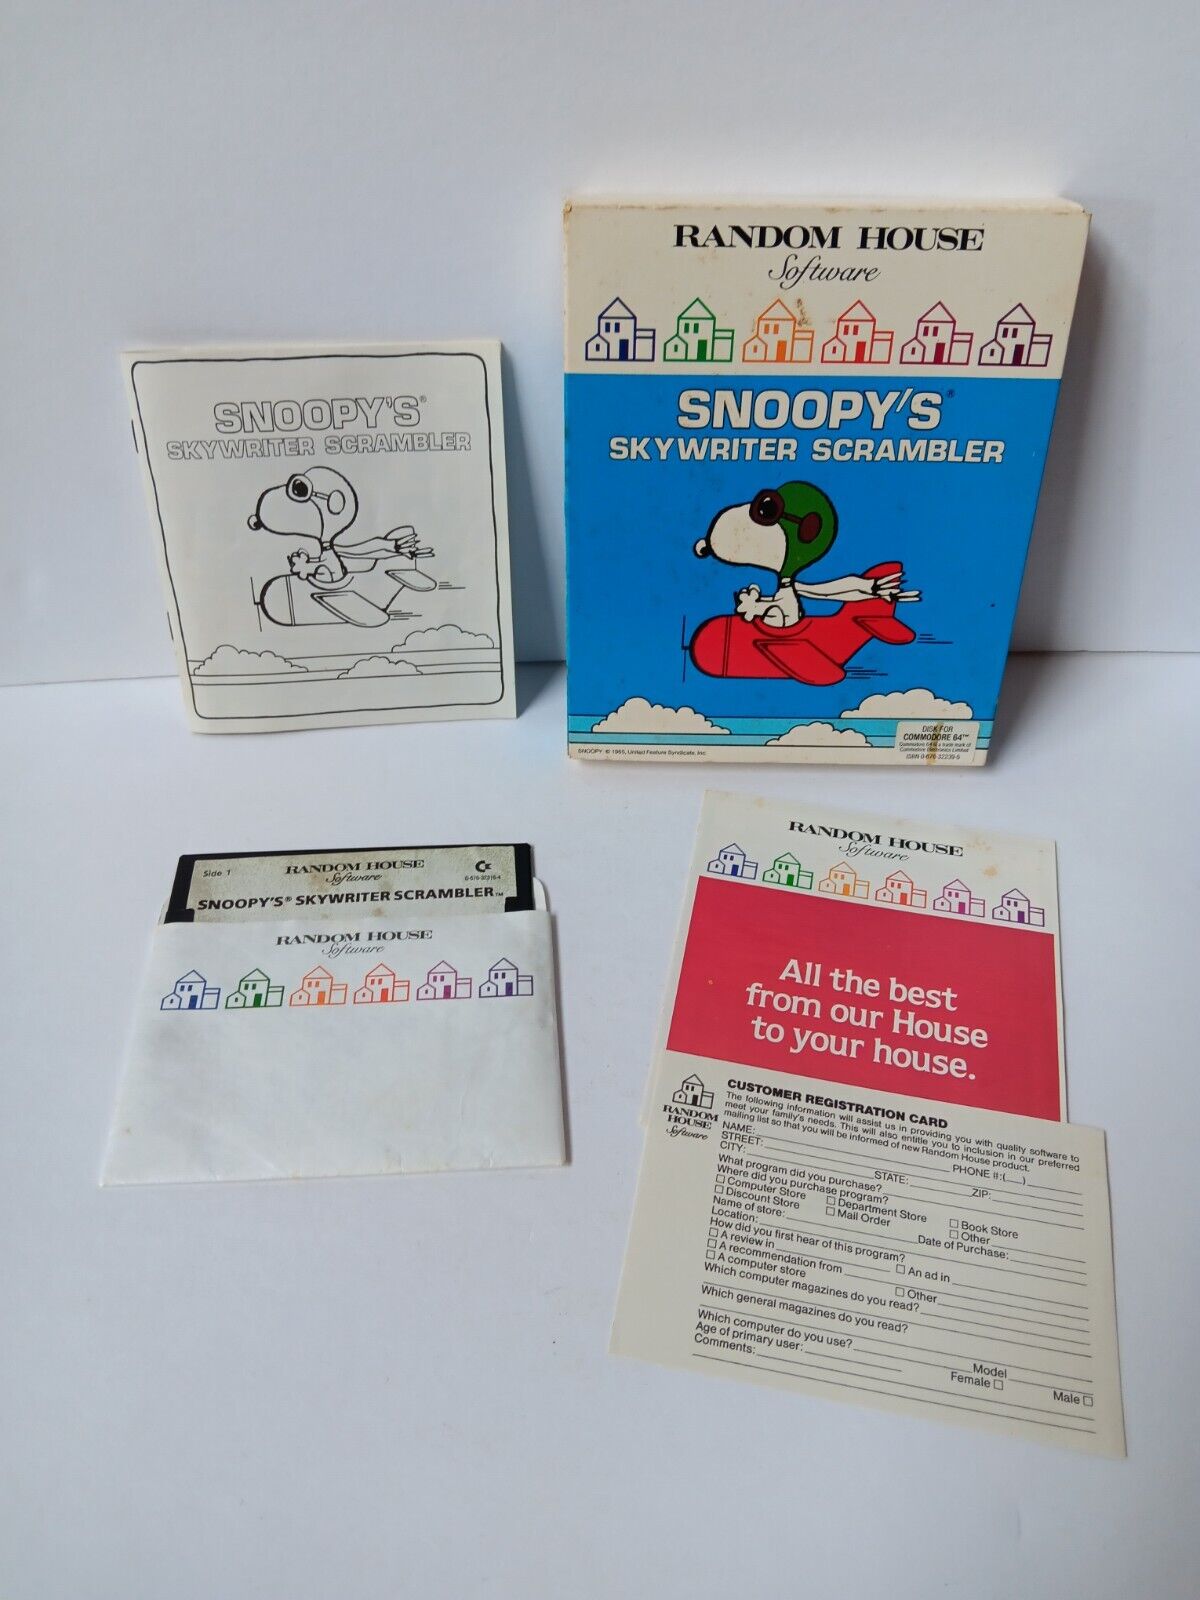 Commodore 64 Snoopys Skywriter Scrambler Computer Game Software Tested/Works